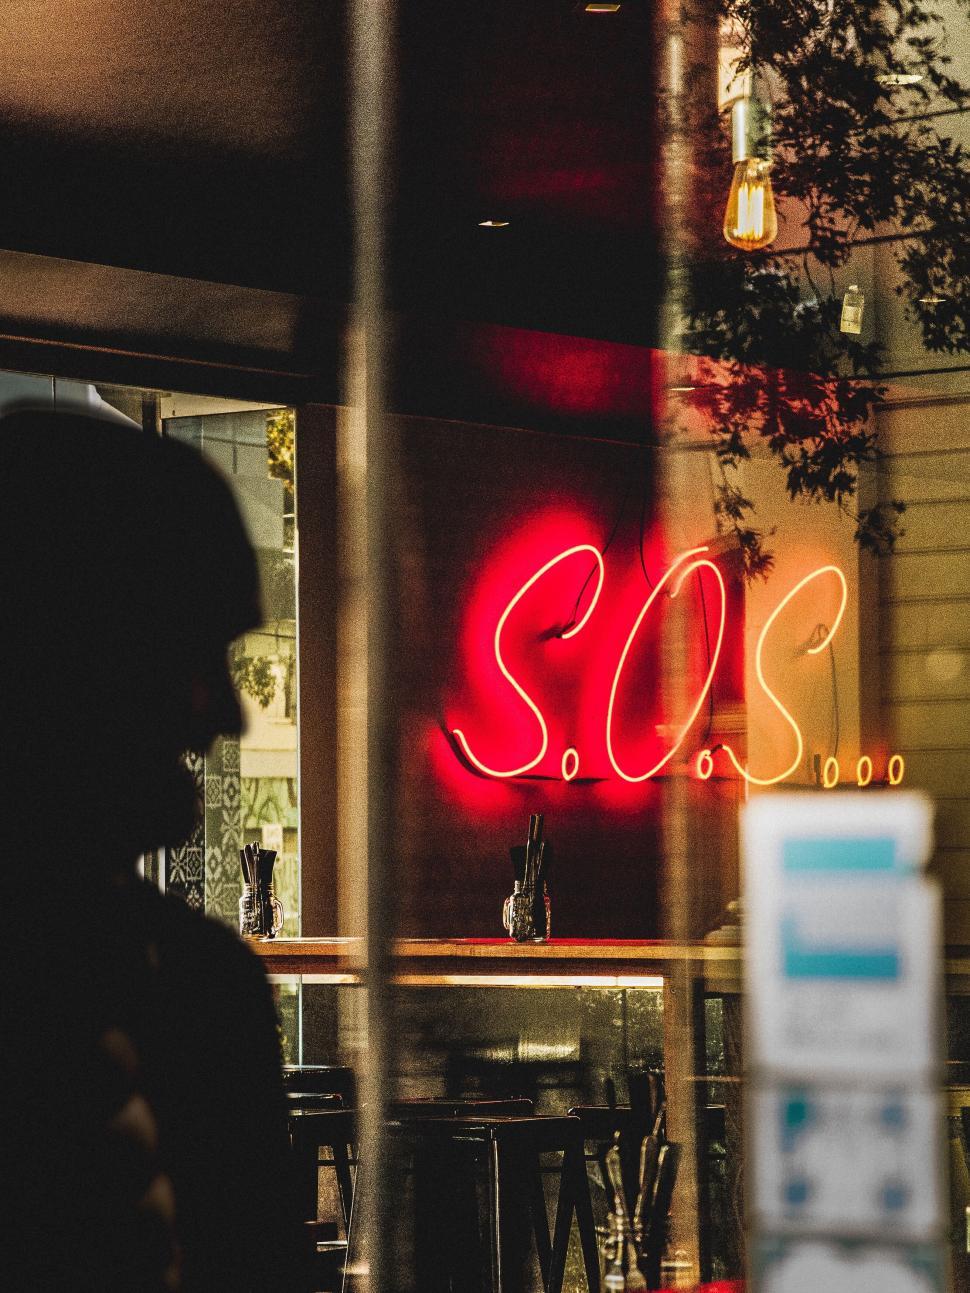 Free Image of Neon Sign SOS in a Window Reflection 